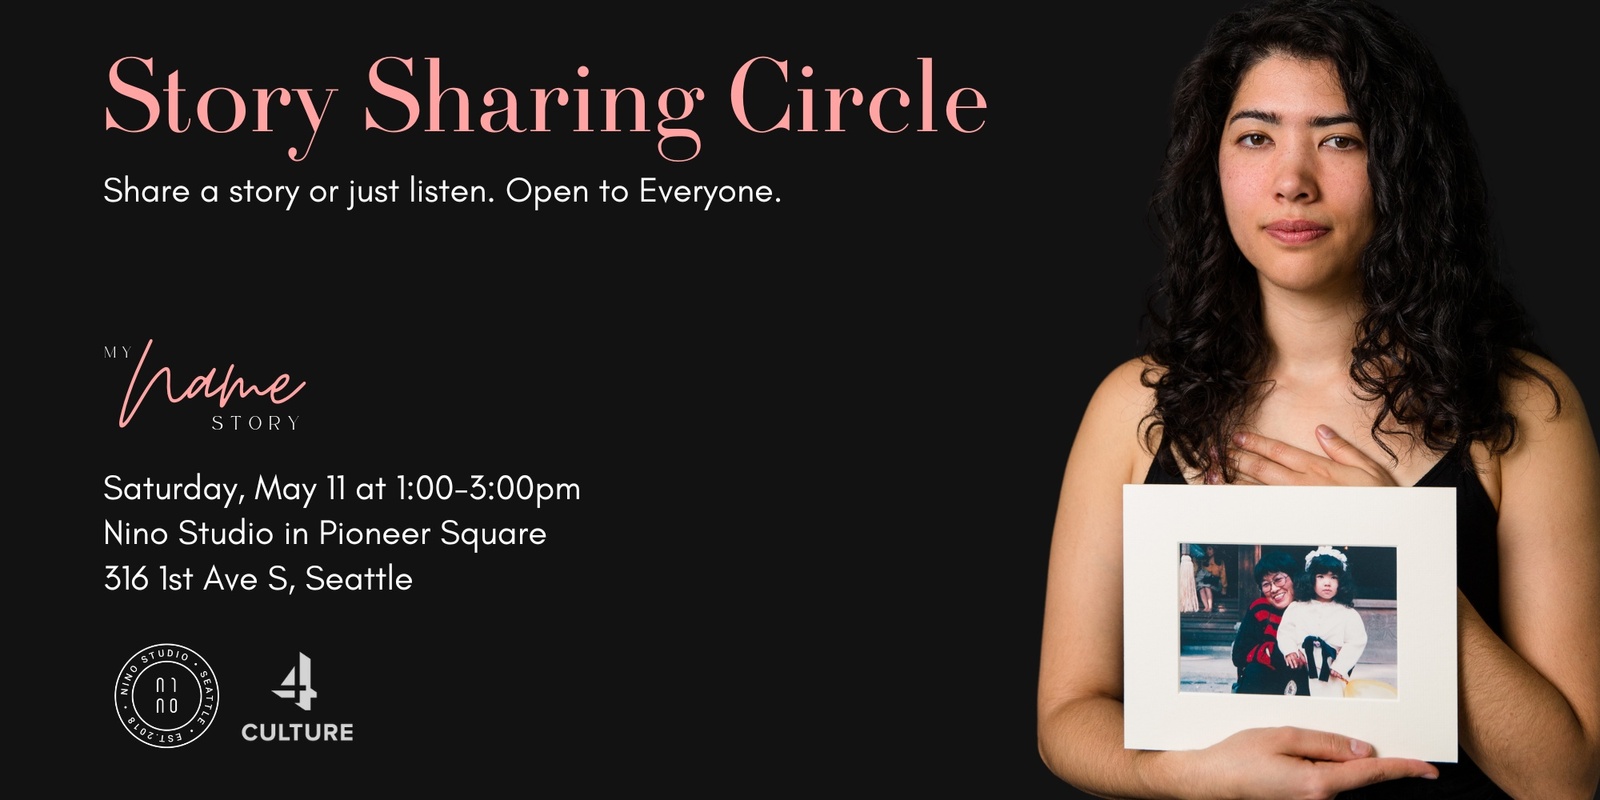 Banner image for My Name Story: Story Sharing Circle